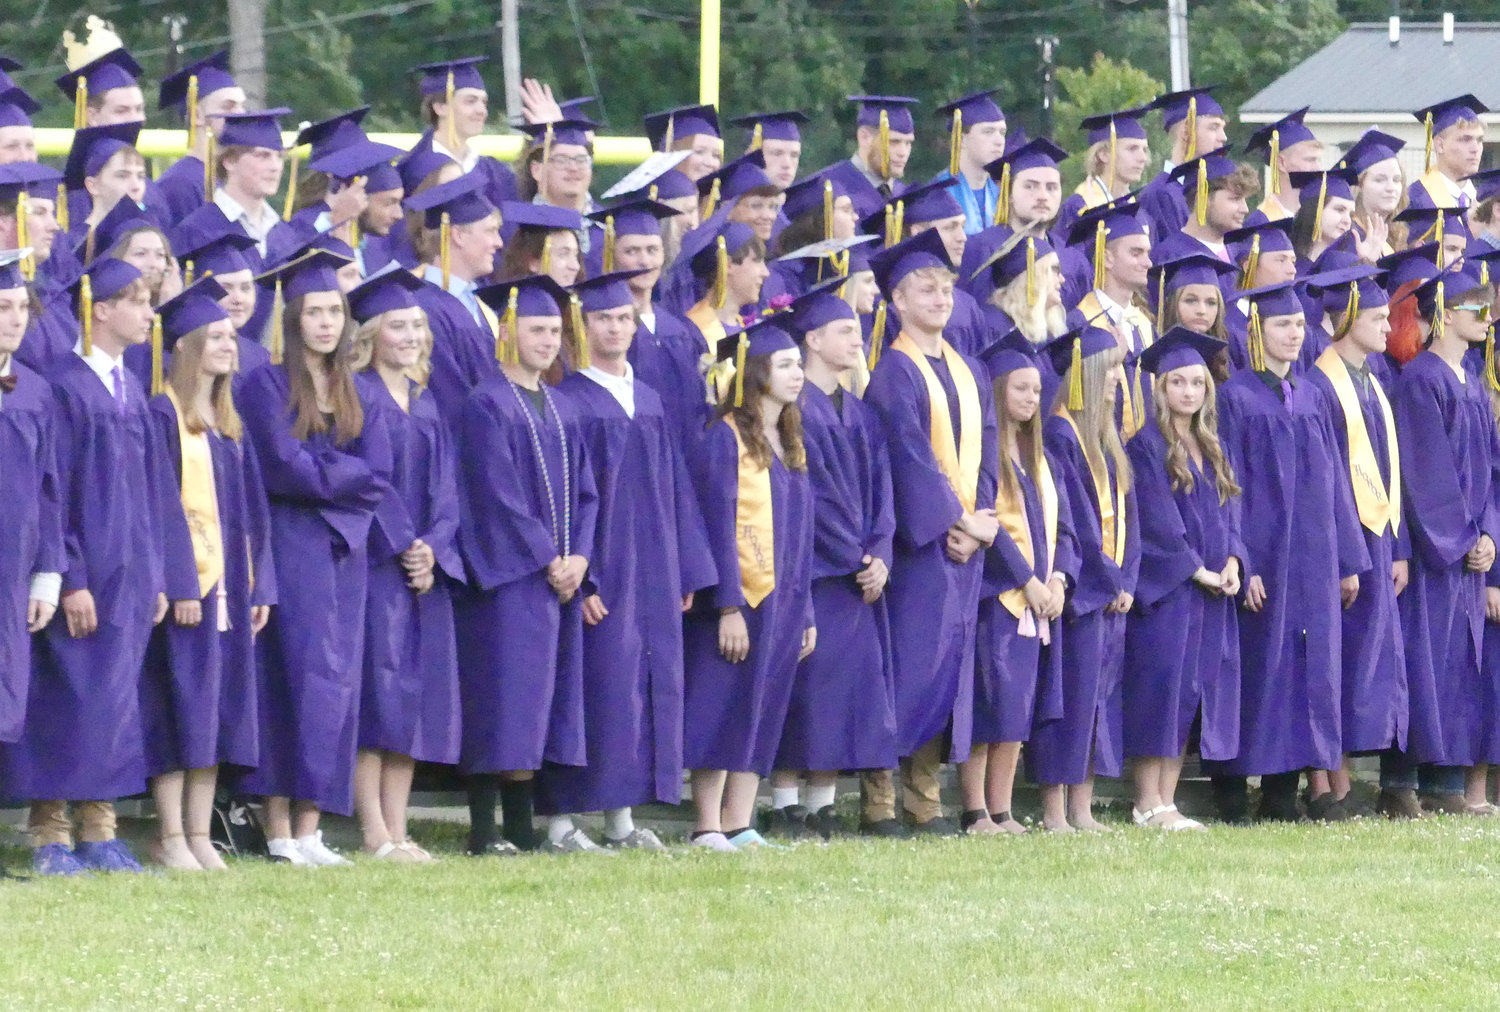 Students in their caps and gowns await to receive their diplomas in Holland Patent during the school district’s 143rd Commencement Ceremony on Friday night at the high school athletic complex.